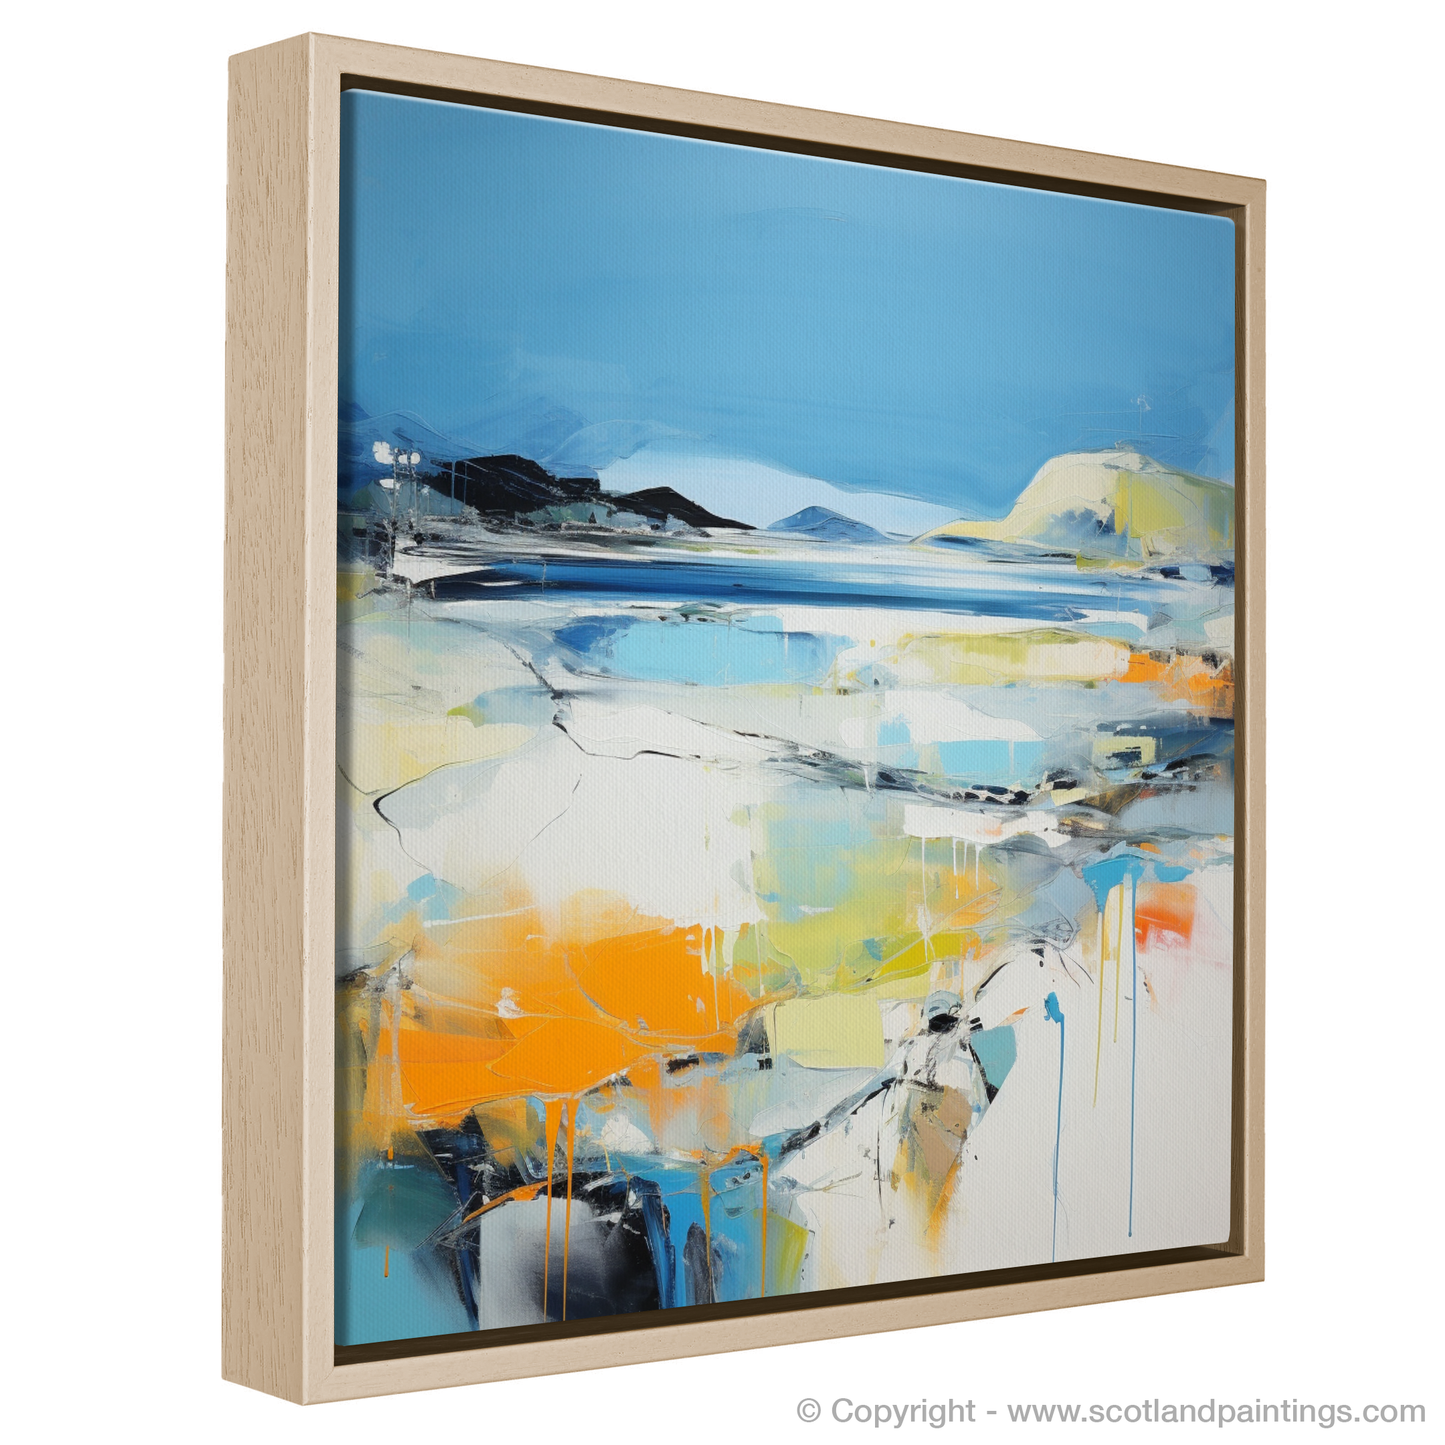 Painting and Art Print of Silver Sands of Morar in summer entitled "Scottish Summertime Abstract: Silver Sands of Morar".